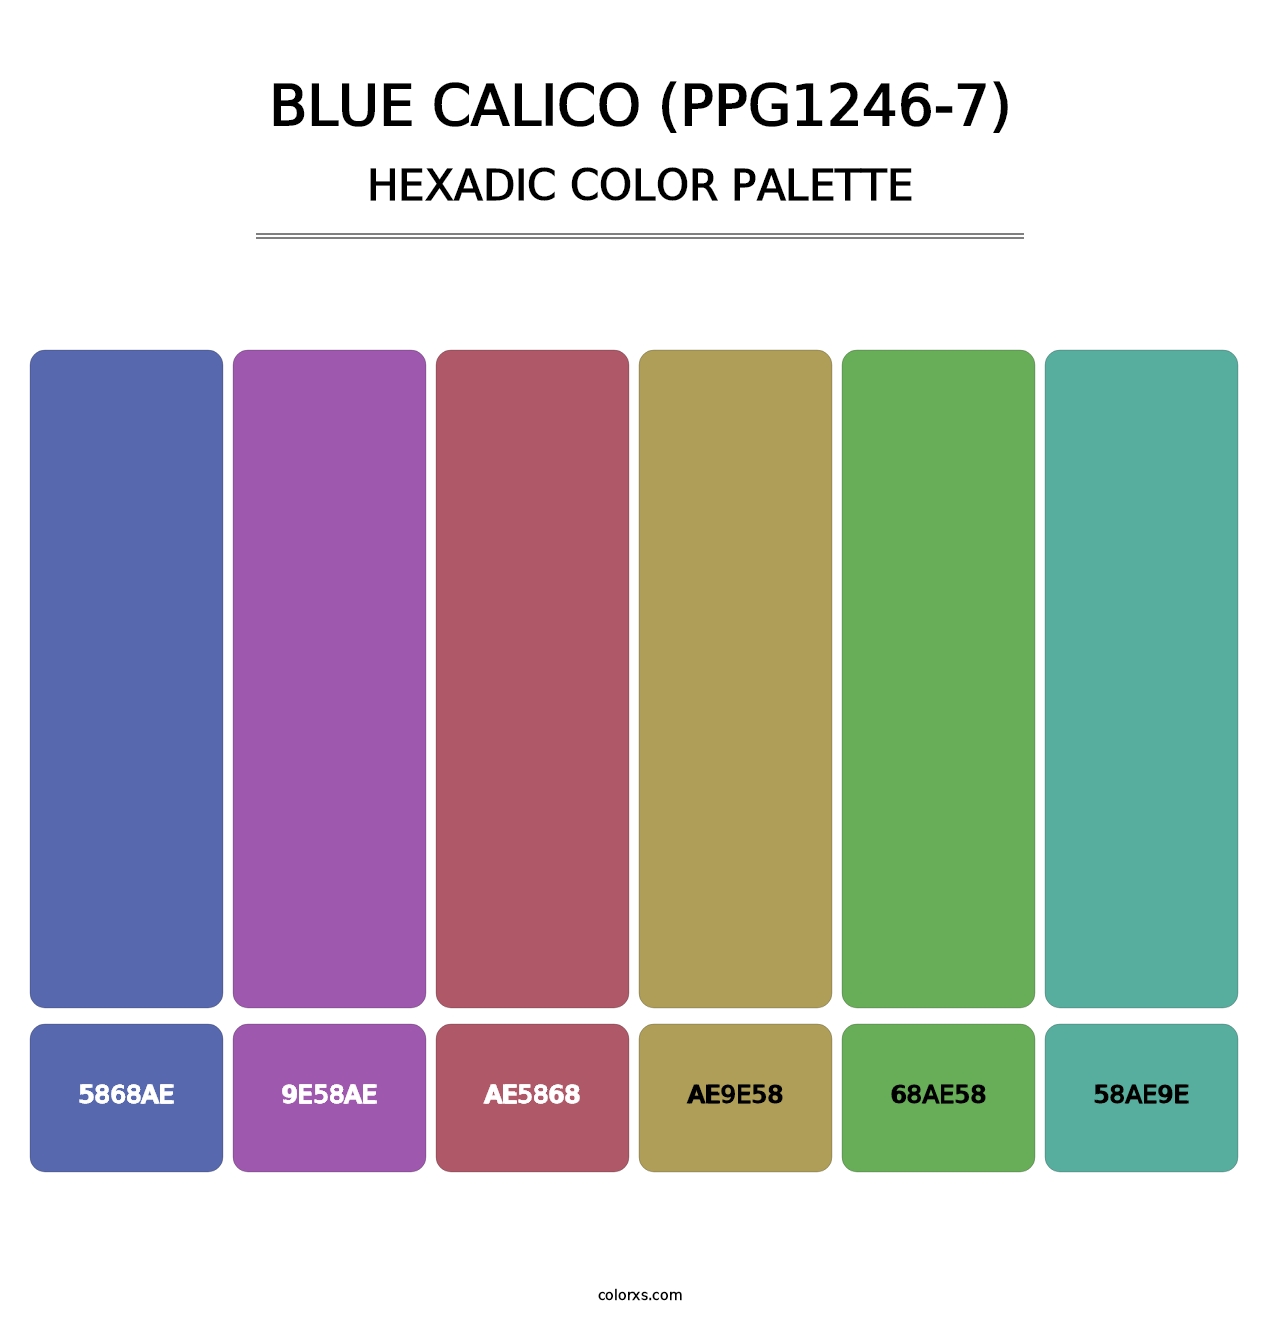 Blue Calico (PPG1246-7) - Hexadic Color Palette